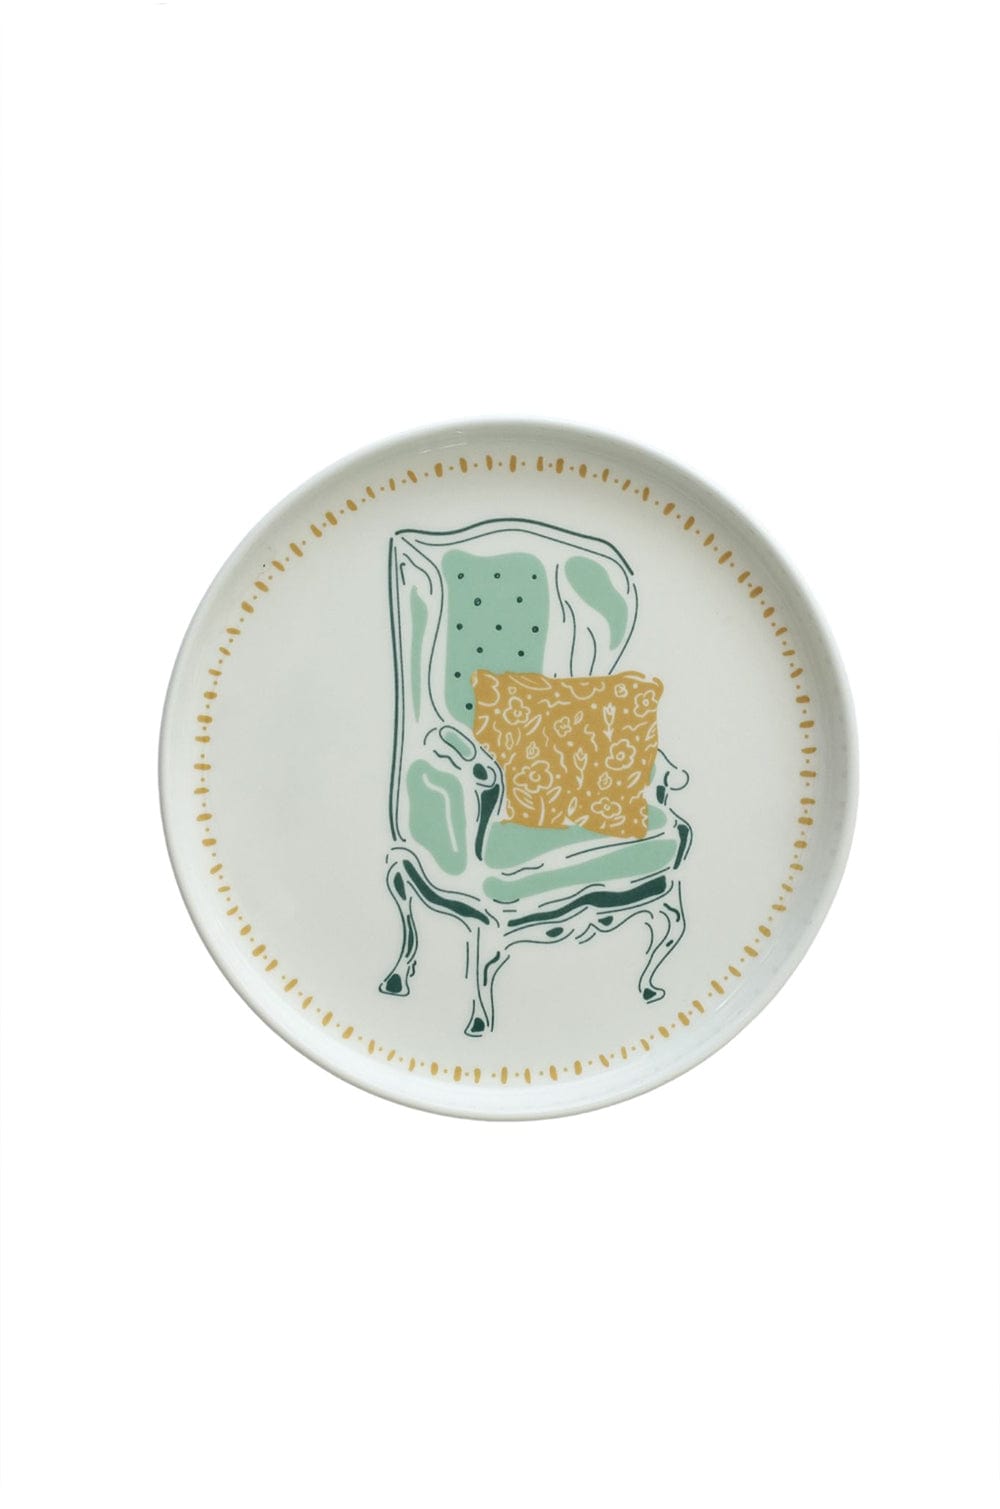 Illustration Series Wall Plate - Chair